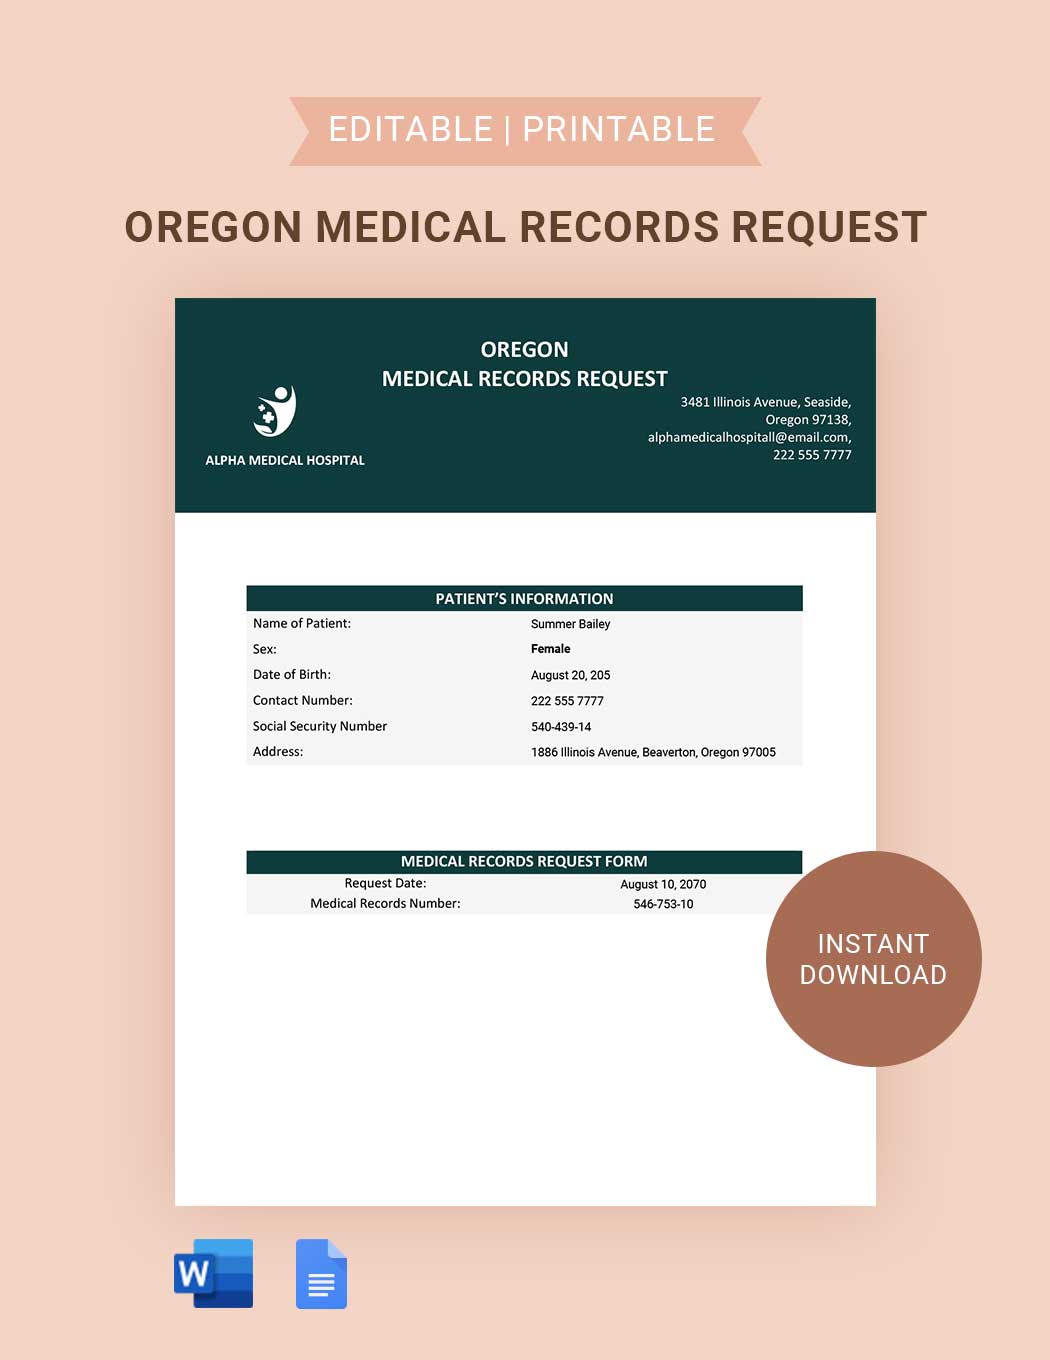 Oregon Medical Records Request Template in Word, Google Docs